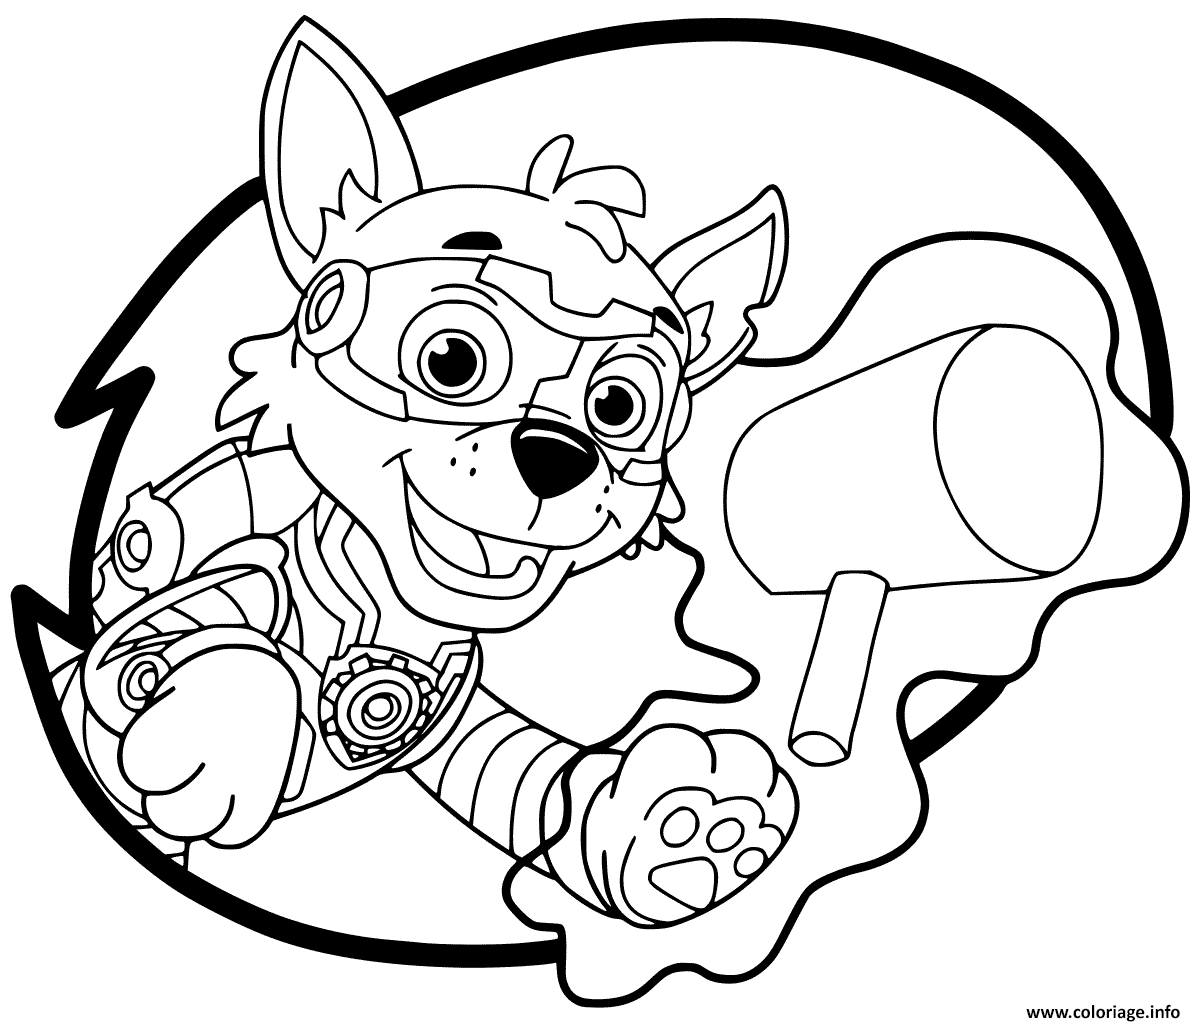 https://coloriage.info/images/ccovers/1629392489Super-Patrouille-Mighty-Pups-Rocky.png